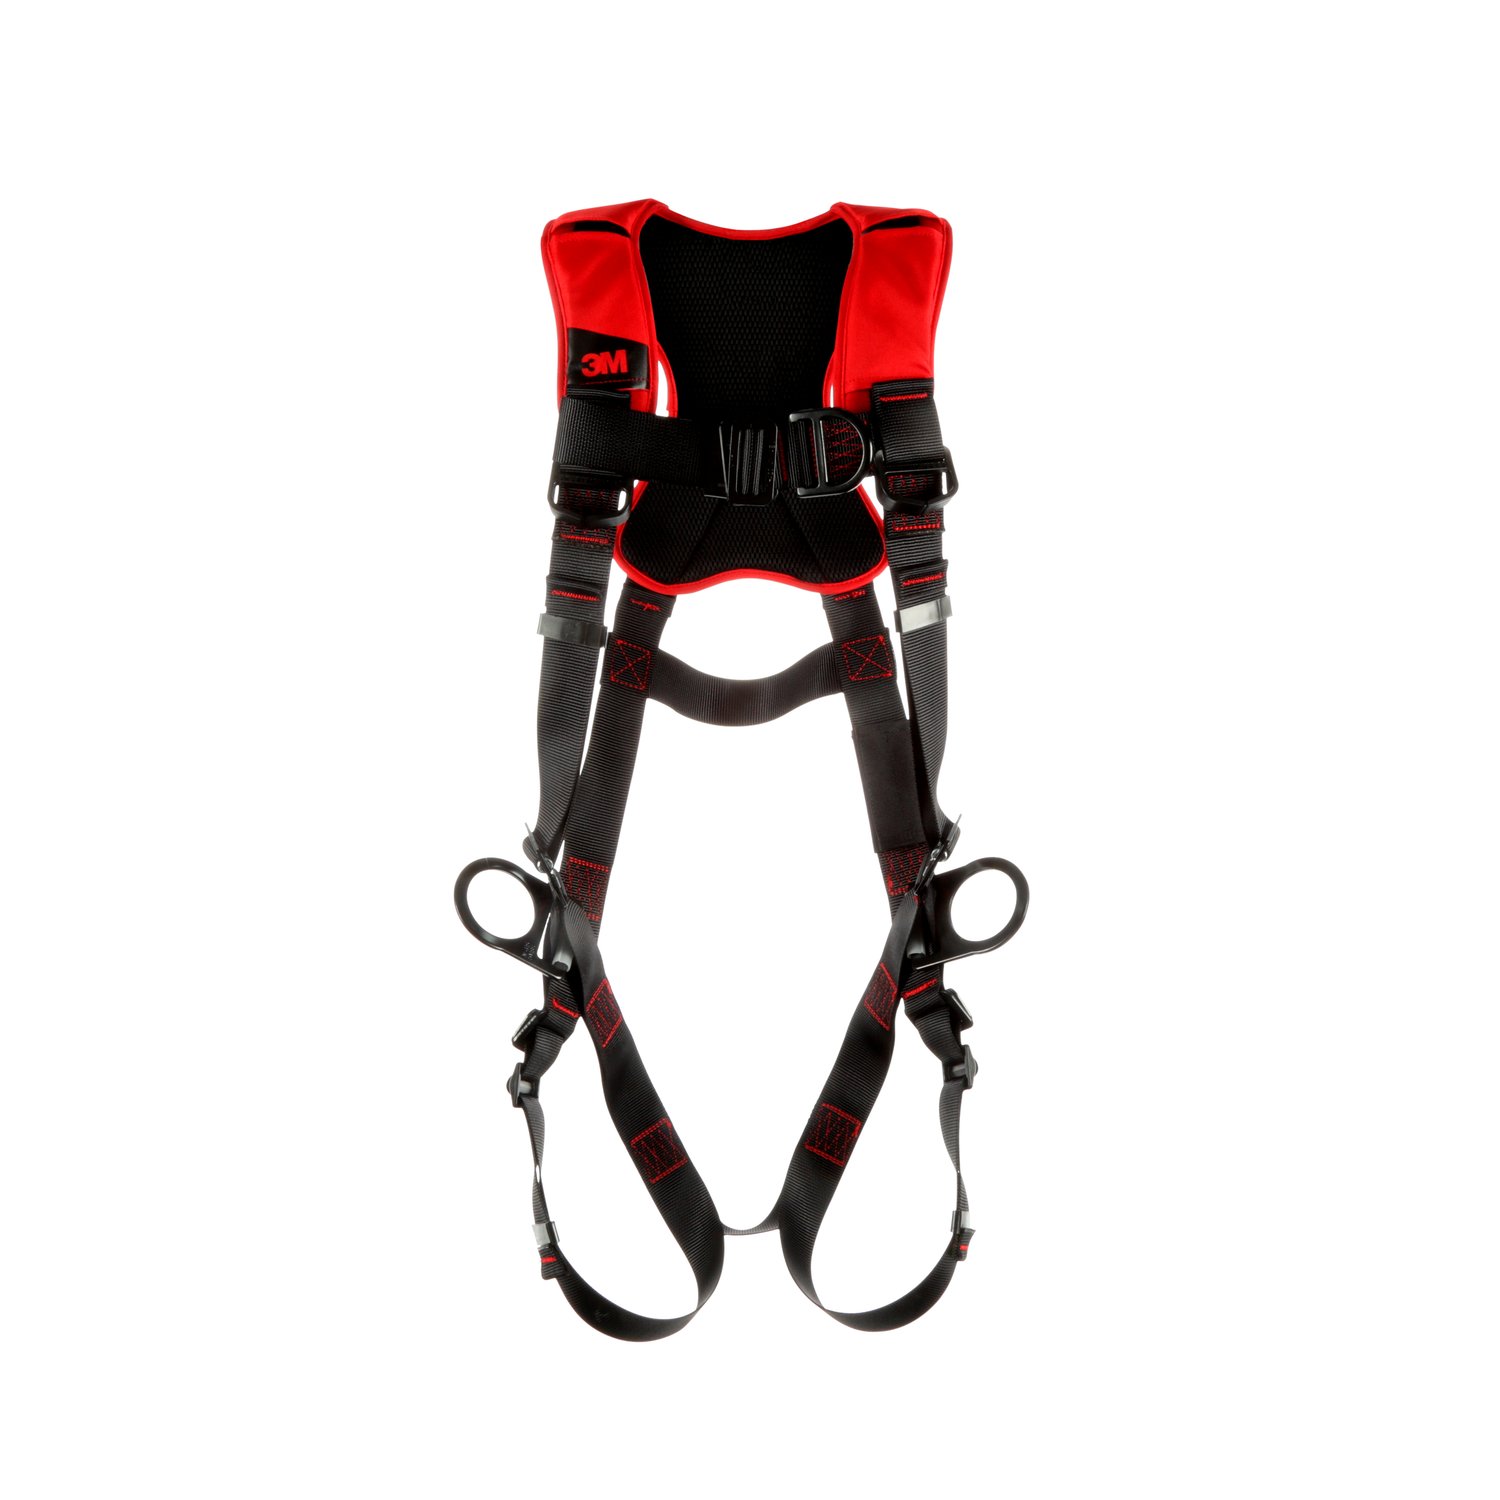 7012816720 - 3M Protecta P200 Comfort Vest Climbing/Positioning Safety Harness 1161438, X-Large